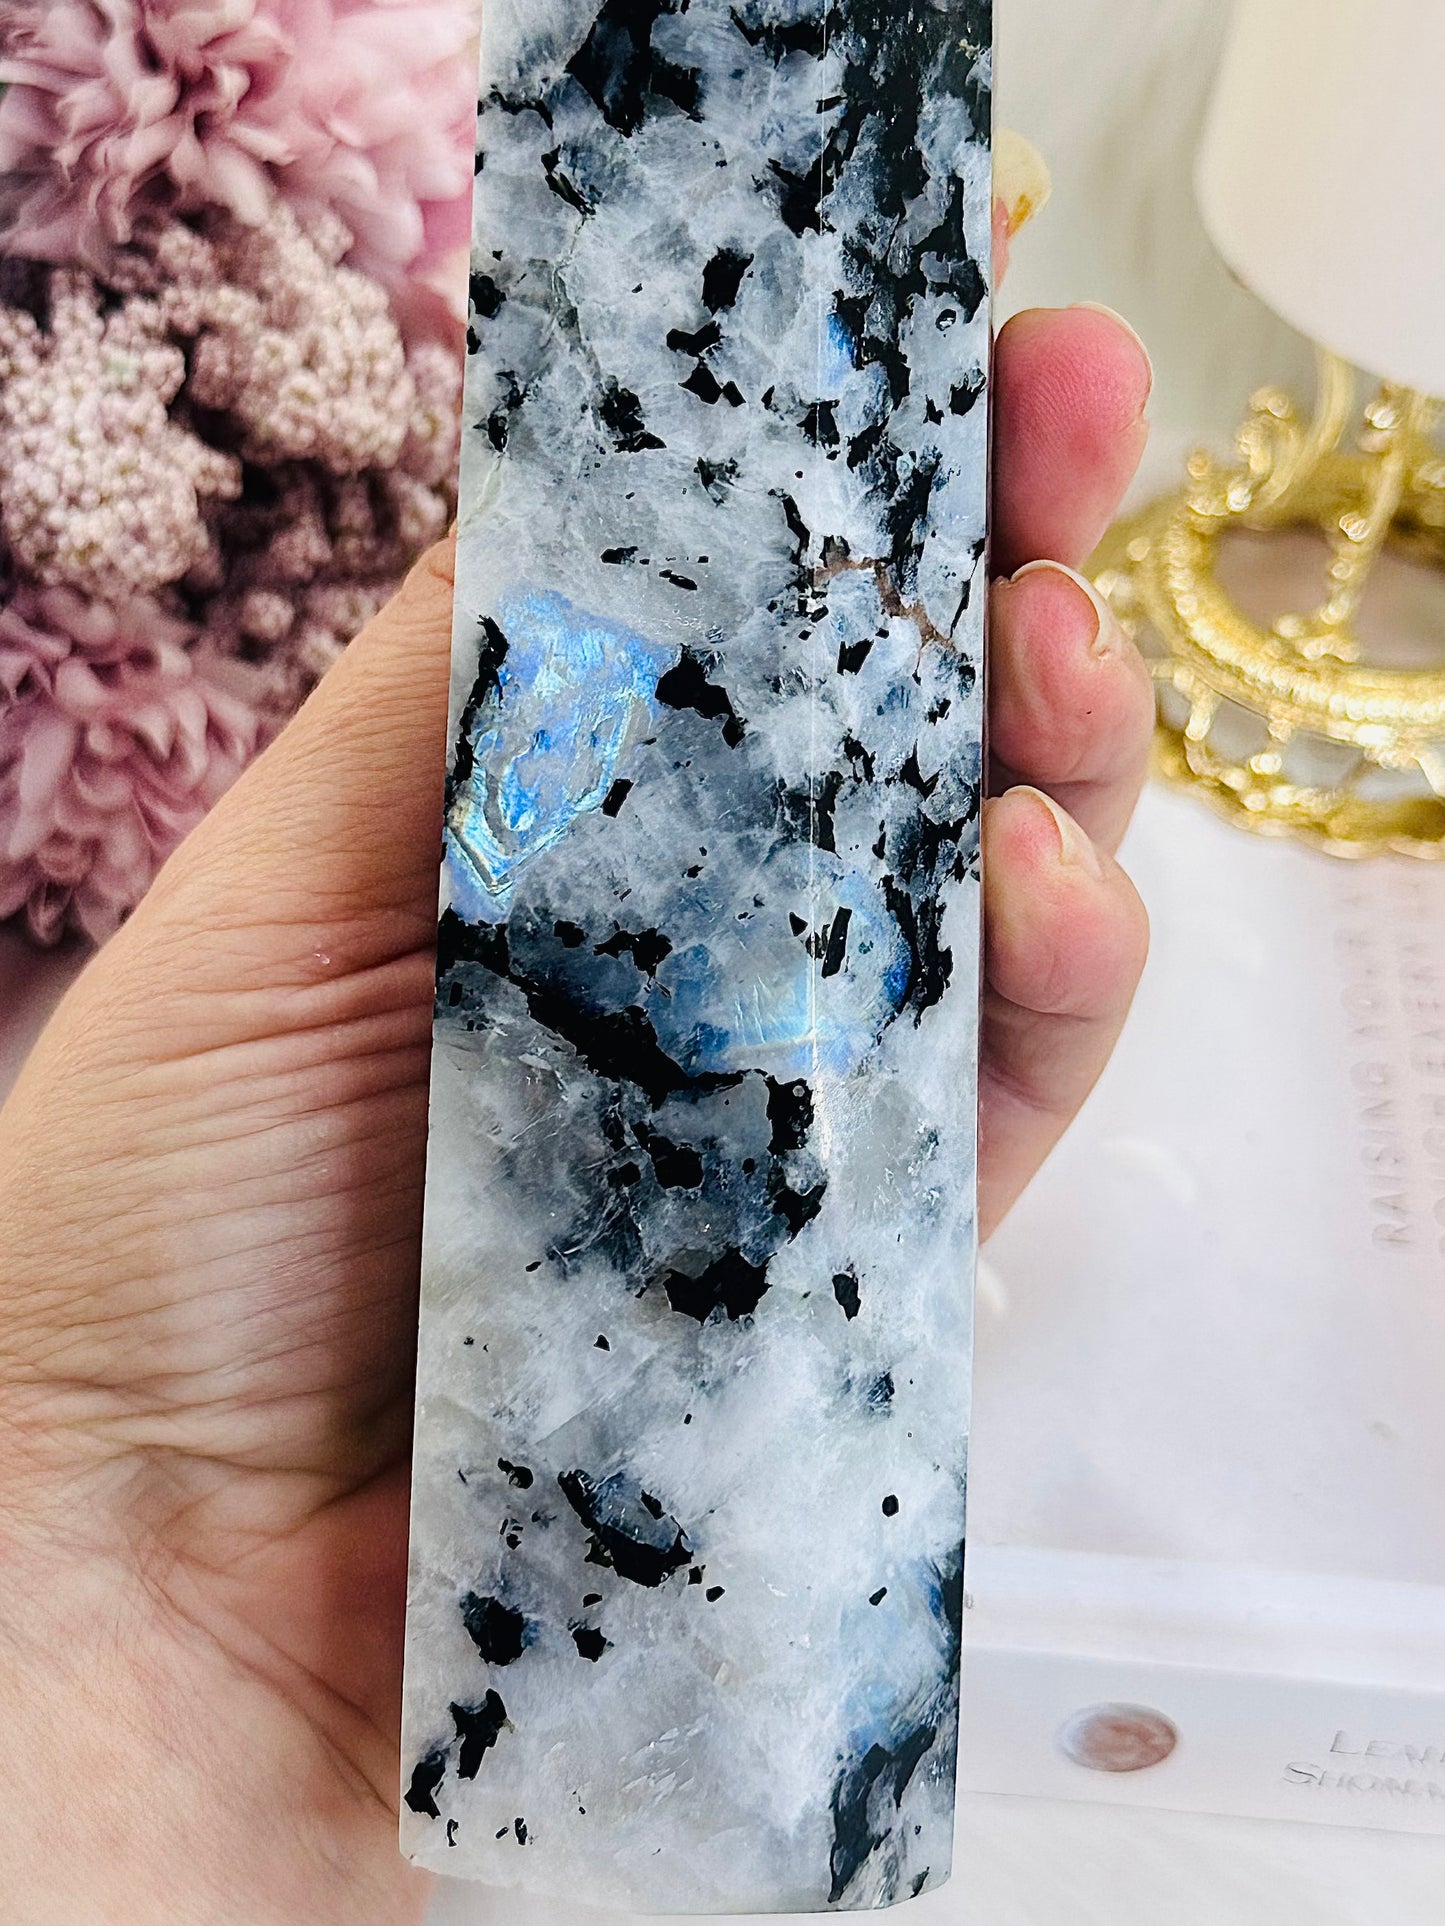 Shield From Negativity ~ WOW!!! Incredible Large 19cm 582gram Rainbow Moonstone Tower with Beautiful Blue Flash